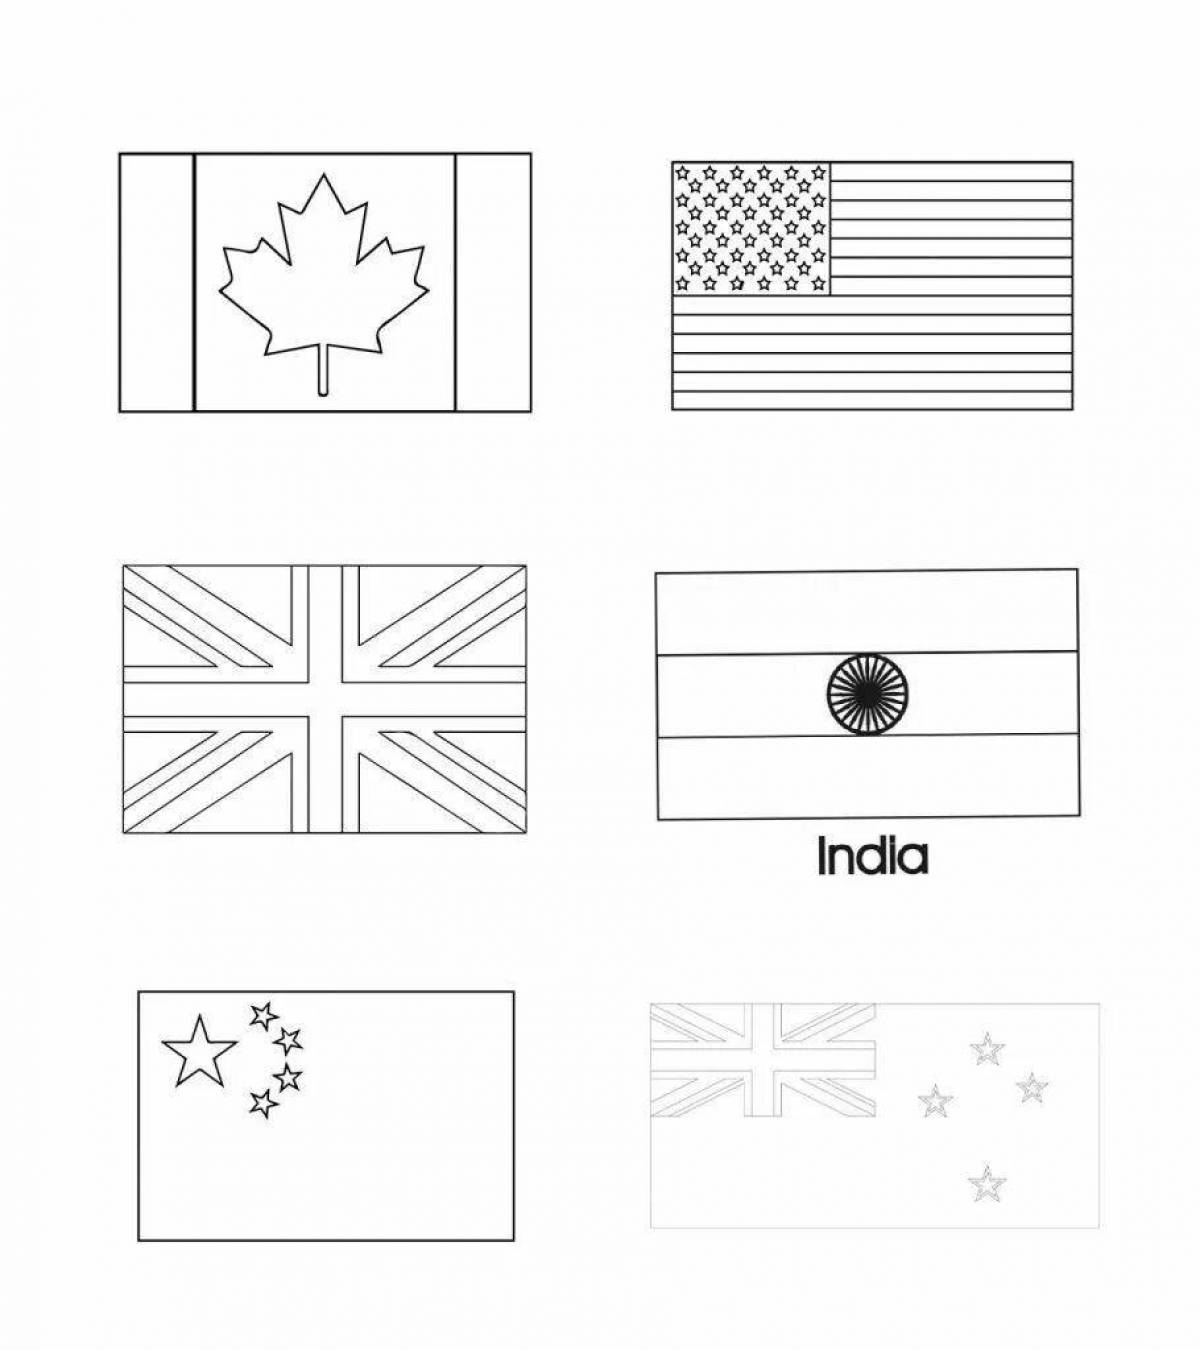 Coloring book glowing all the flags of the world